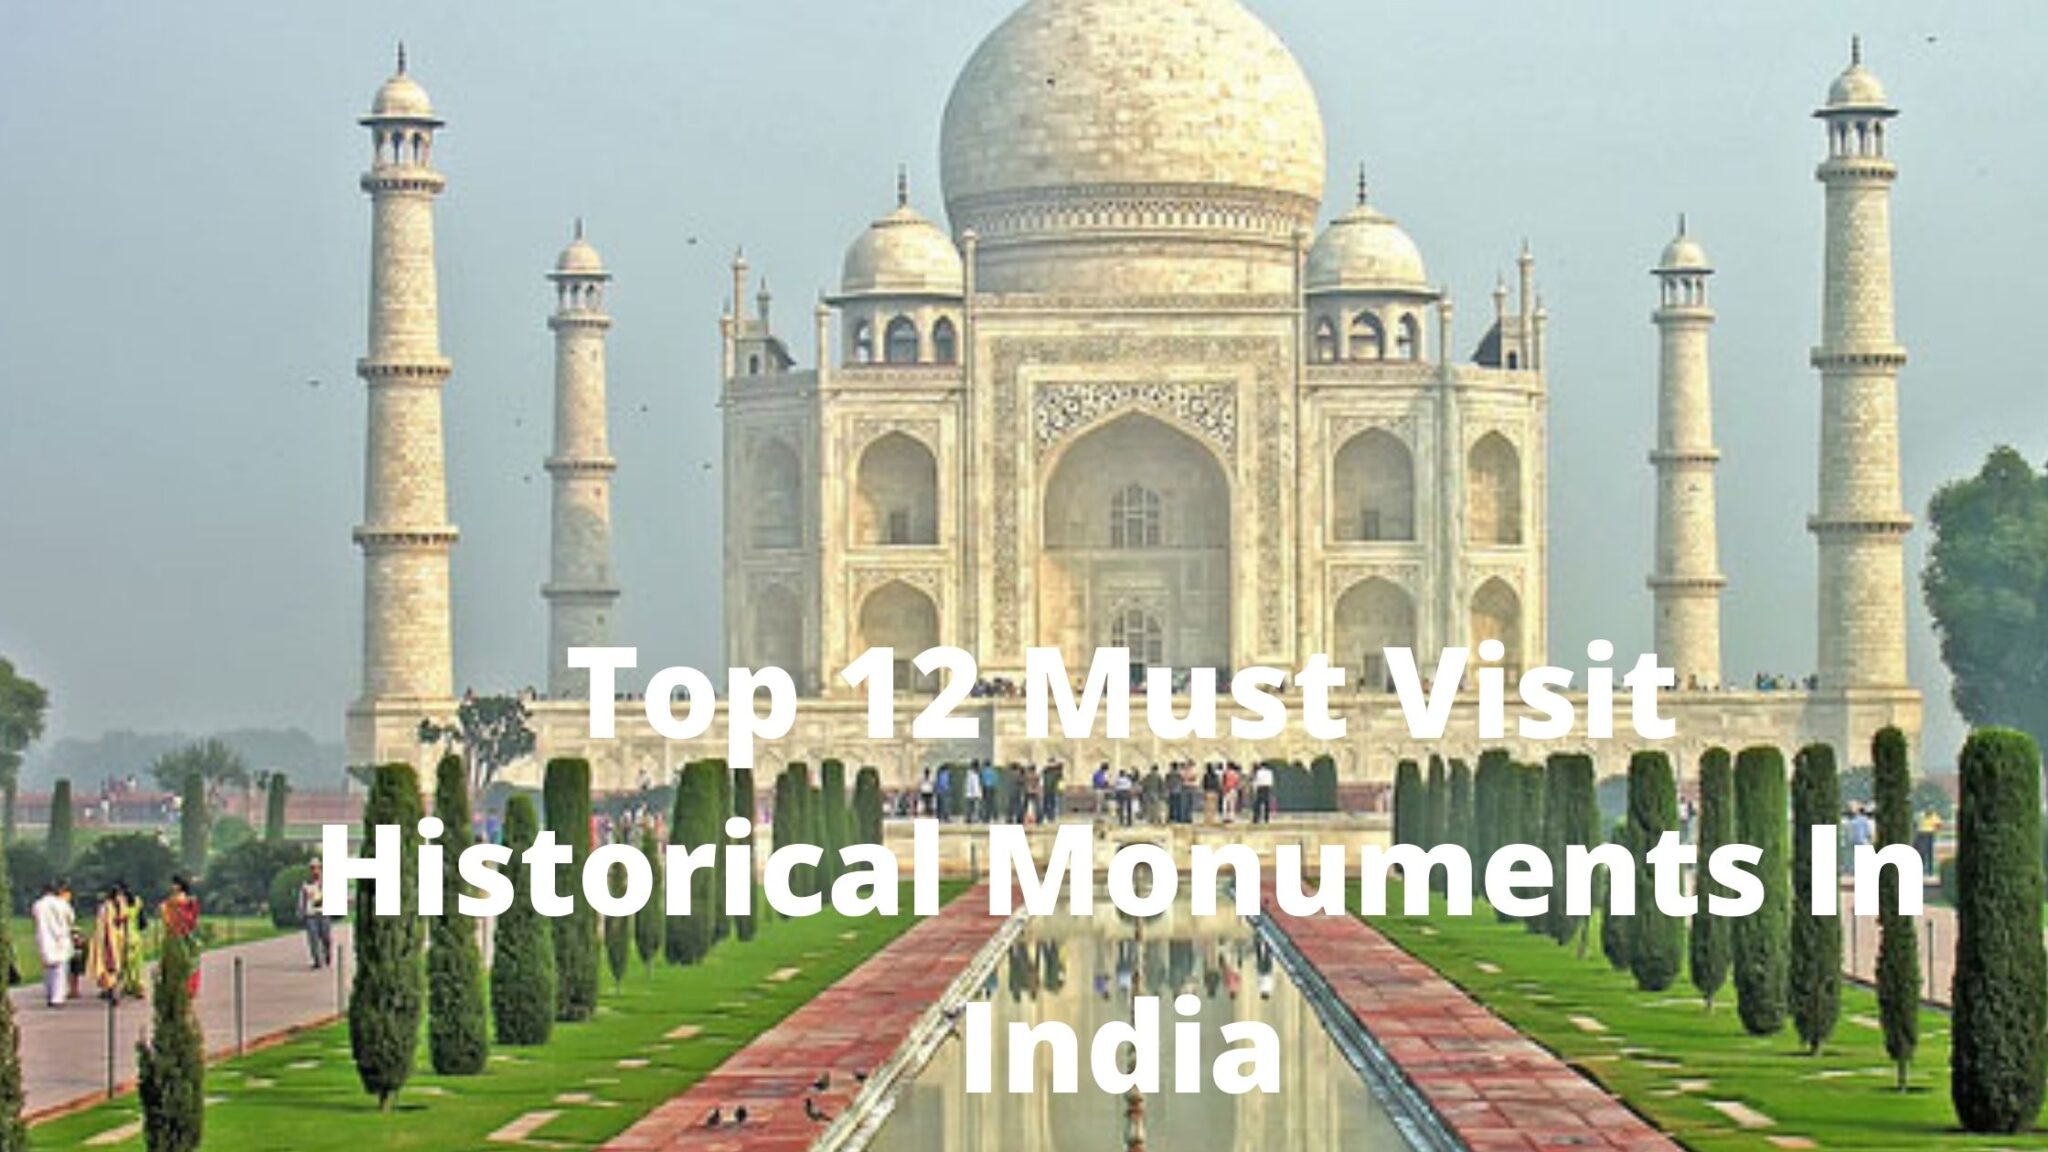 presentation on monuments of india